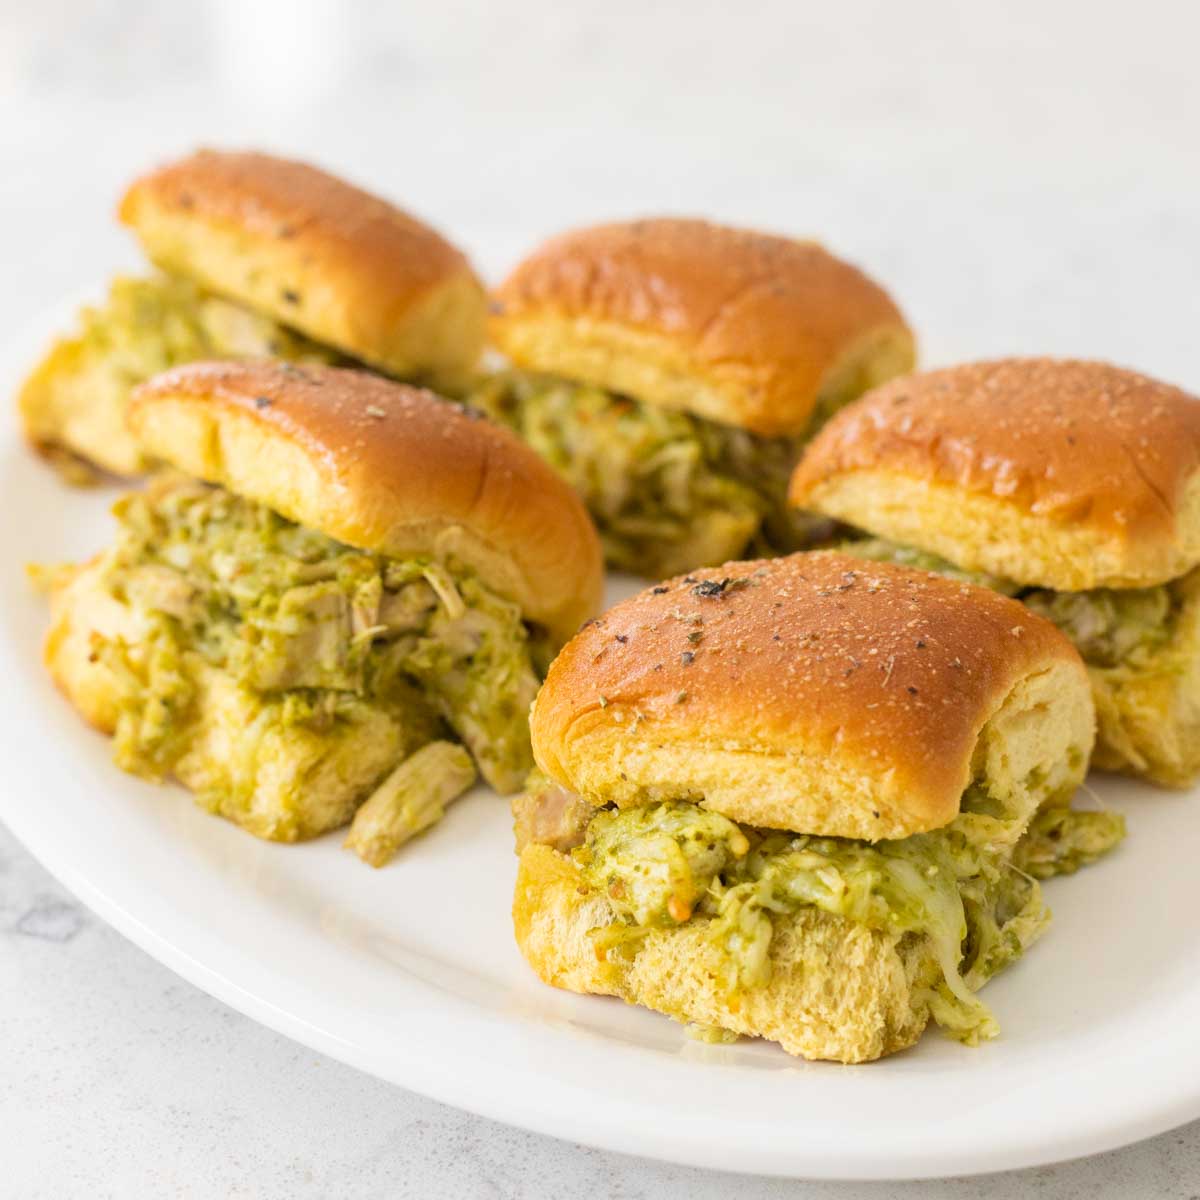 A white platter is filled with shredded chicken sliders with a pesto sauce.